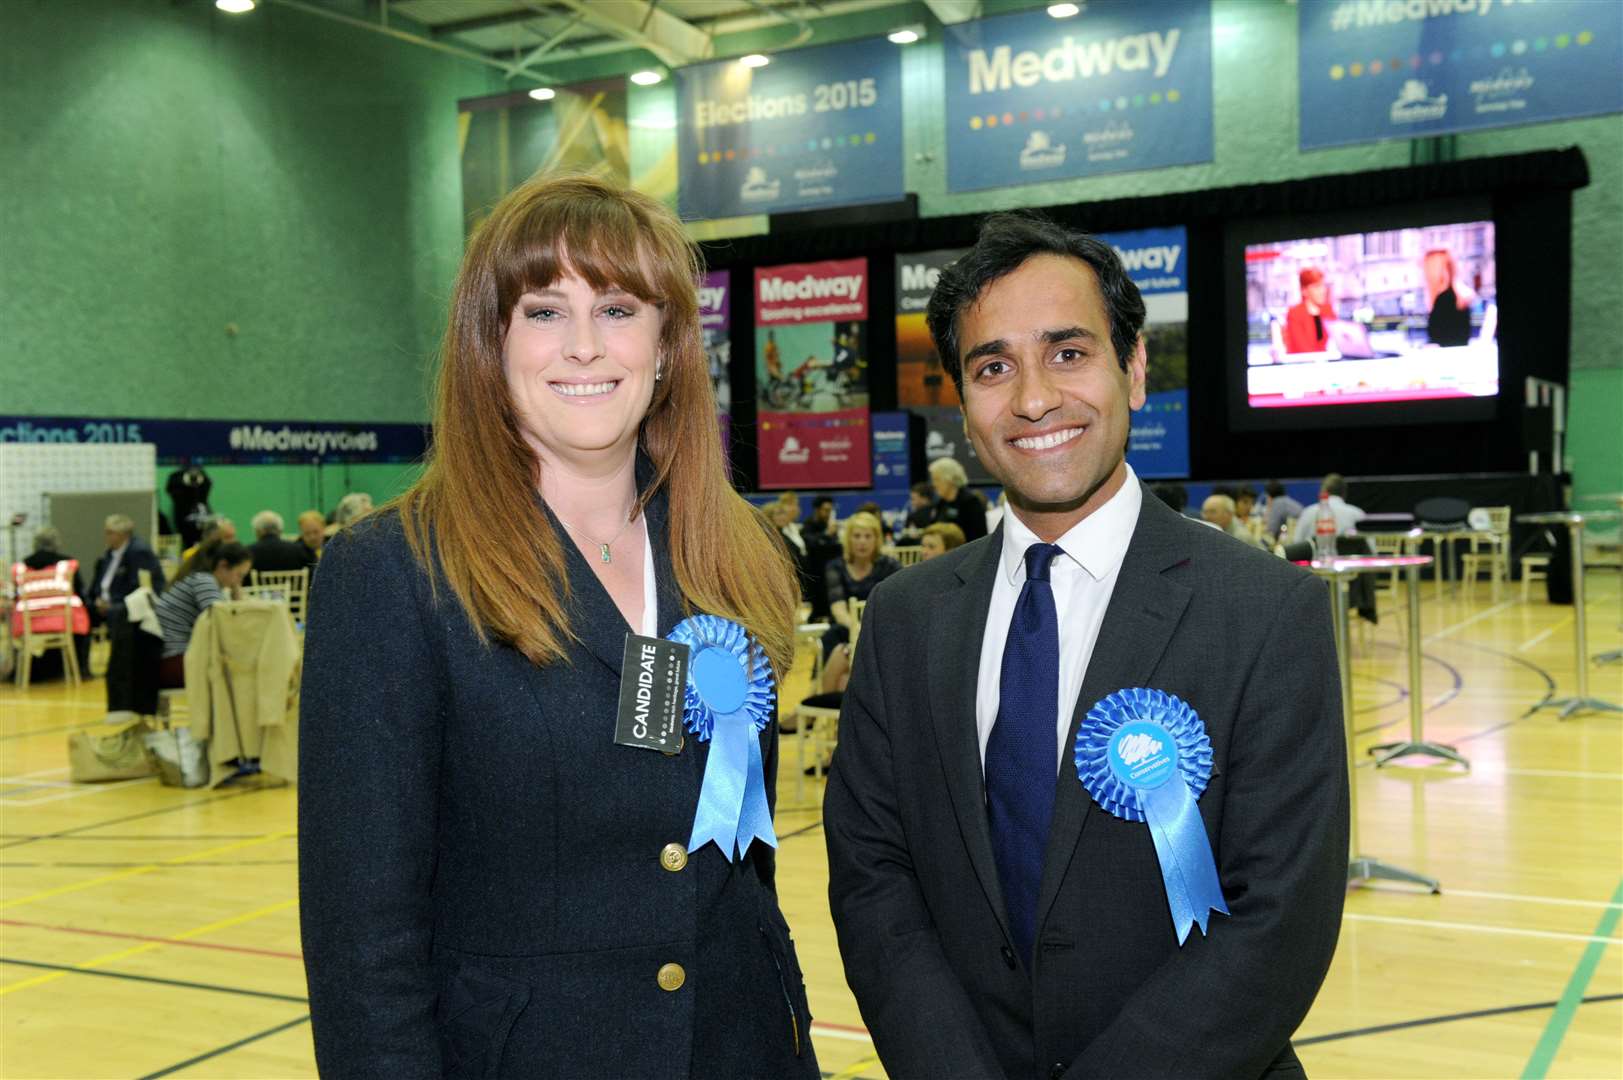 Kelly Tolhurst MP and Rehman Chishti MP at the election count